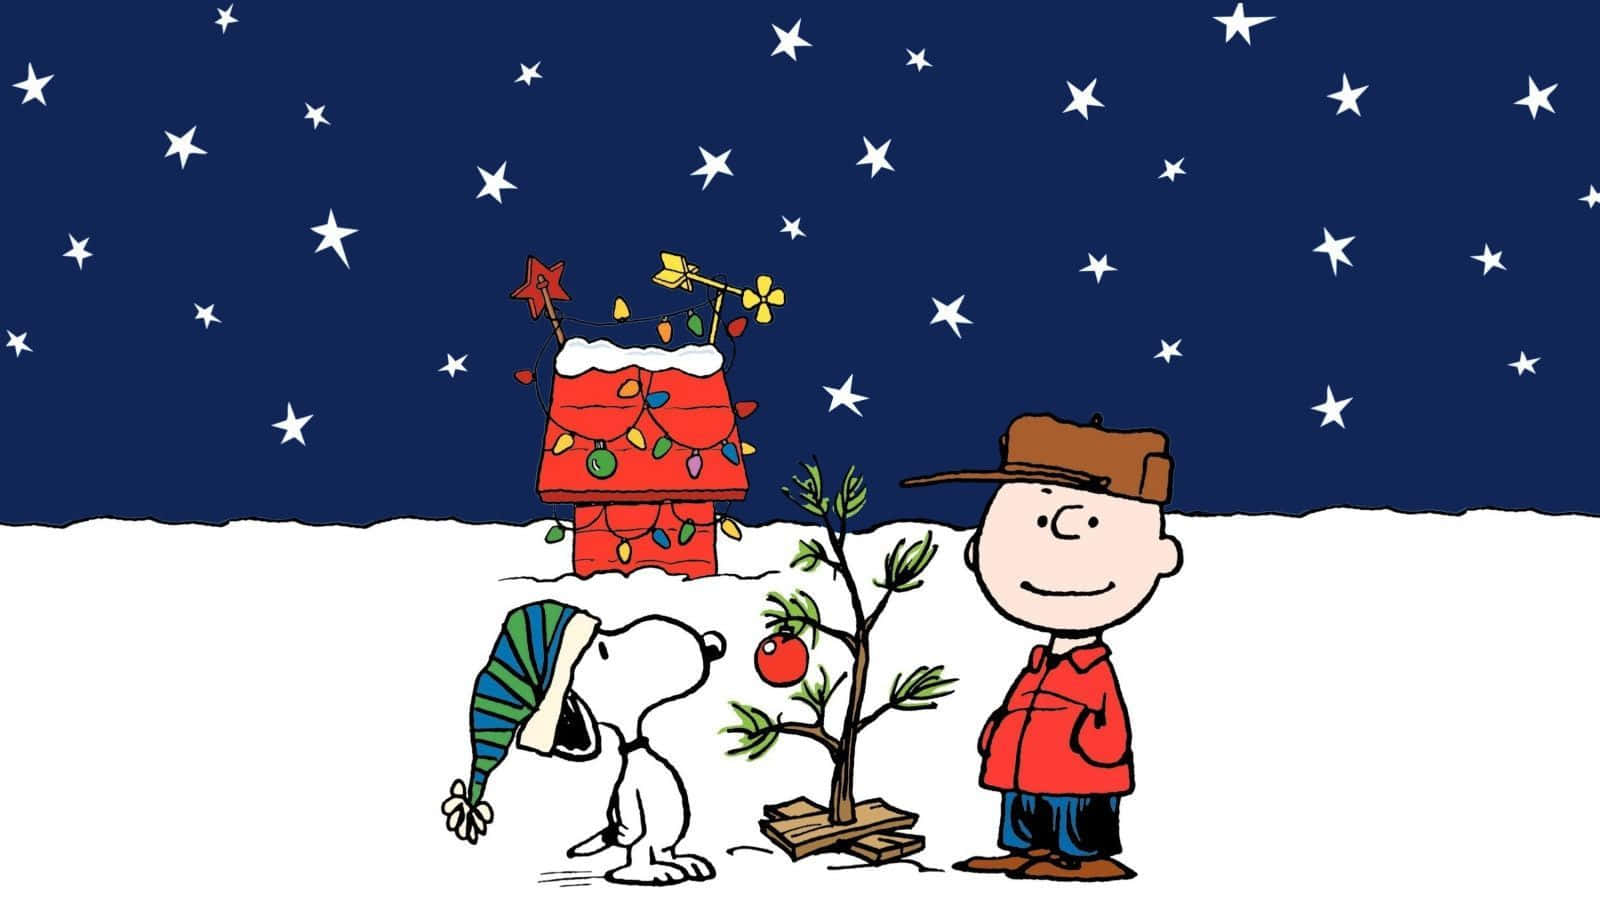 Spread Holiday Cheer With Charlie Brown